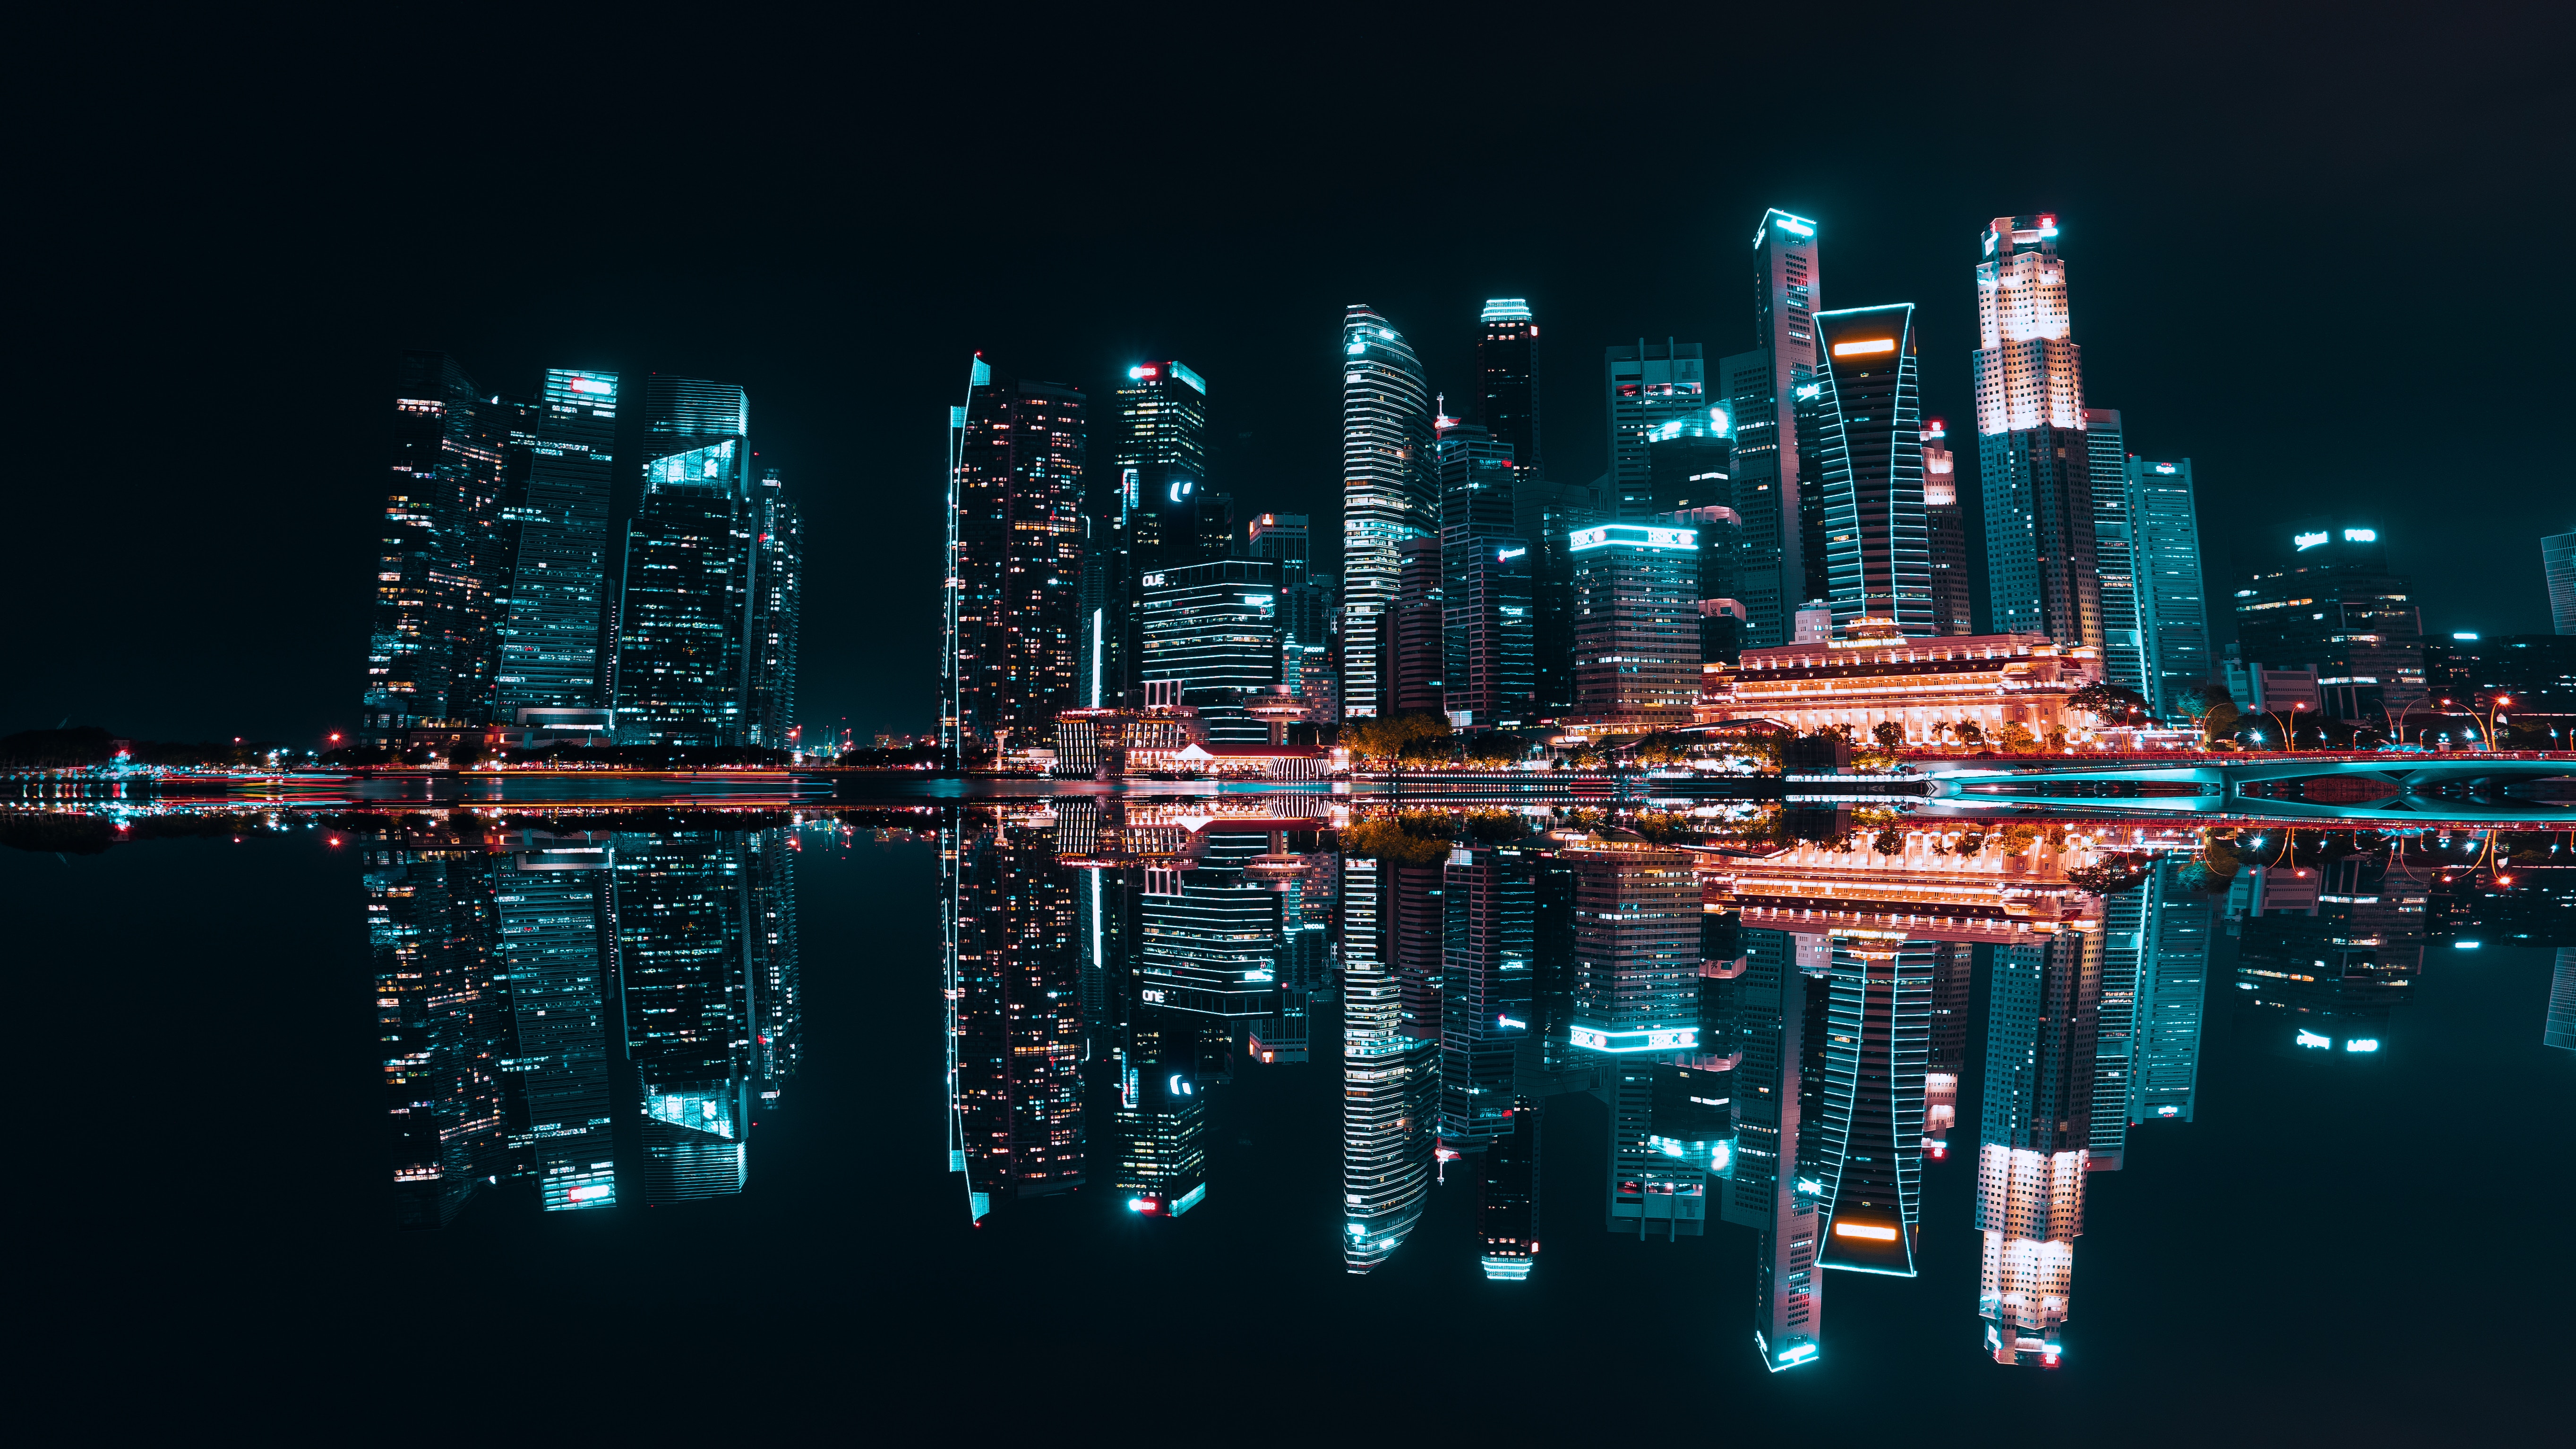 night city, illumination, lake, cities, building, reflection, skyscrapers, backlight, electricity 1080p